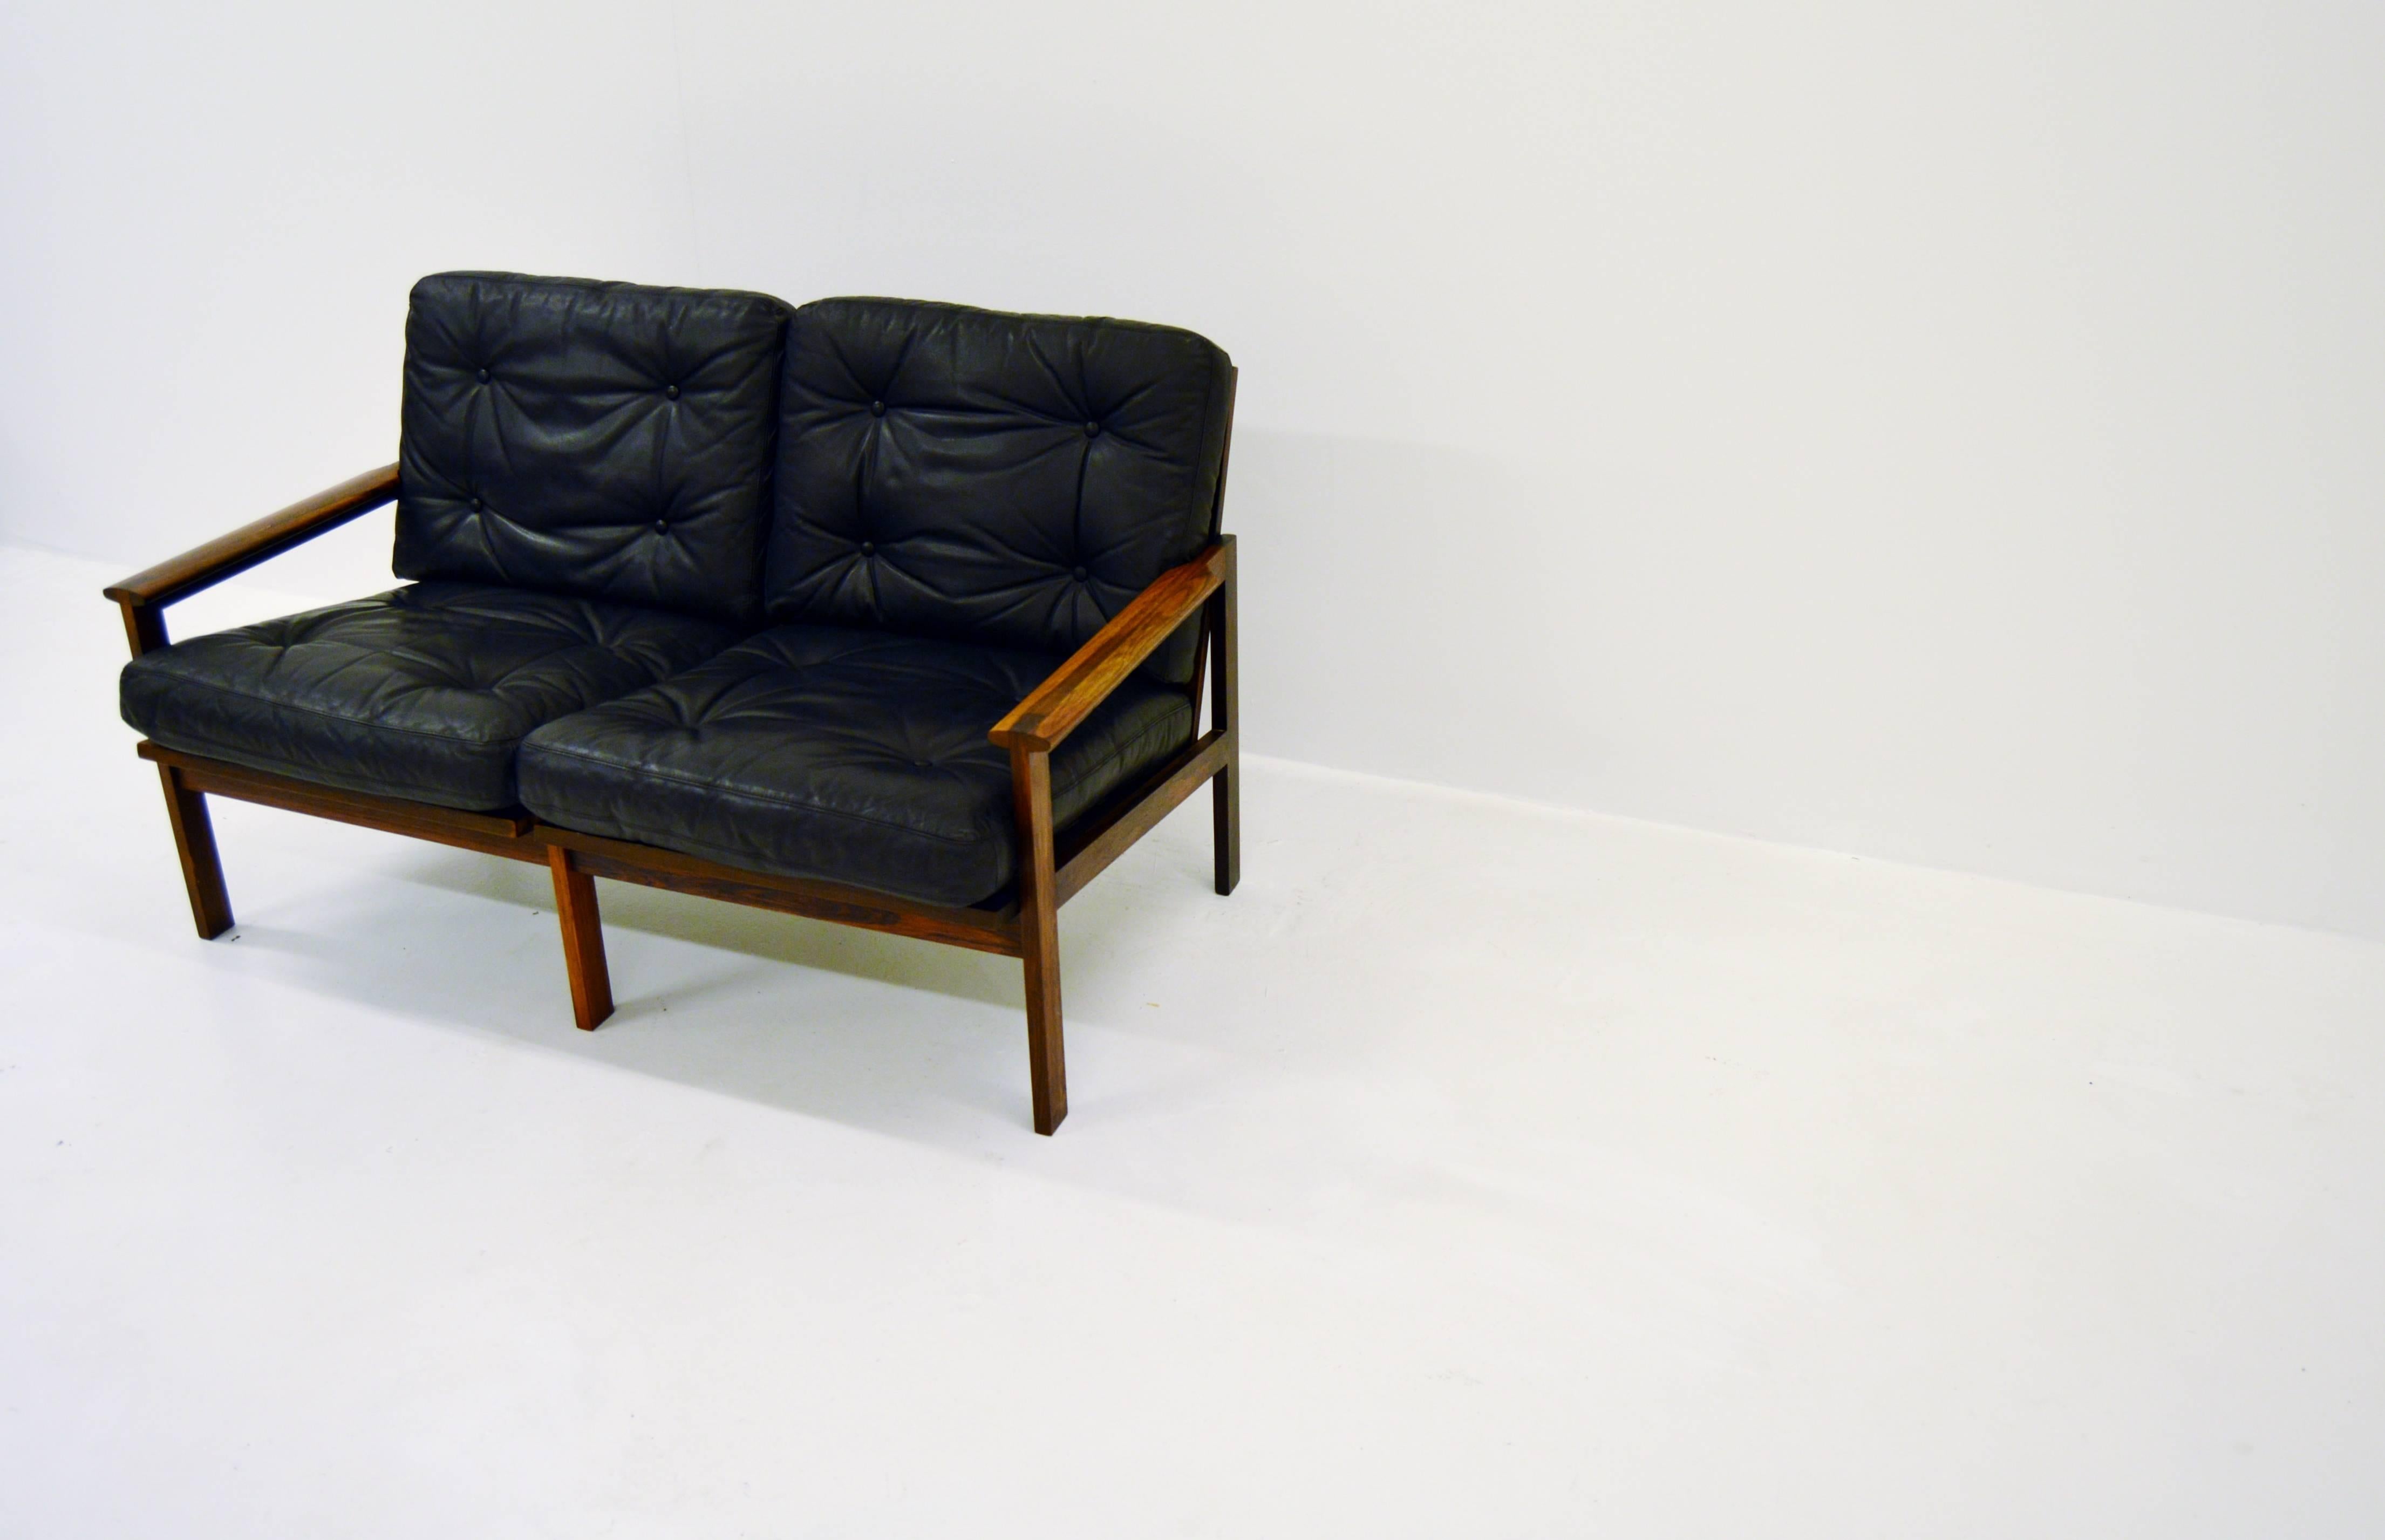 20th Century Two-Seat Sofa by Illum Wikkelsø Capella for Niels Eilersen in Rosewood